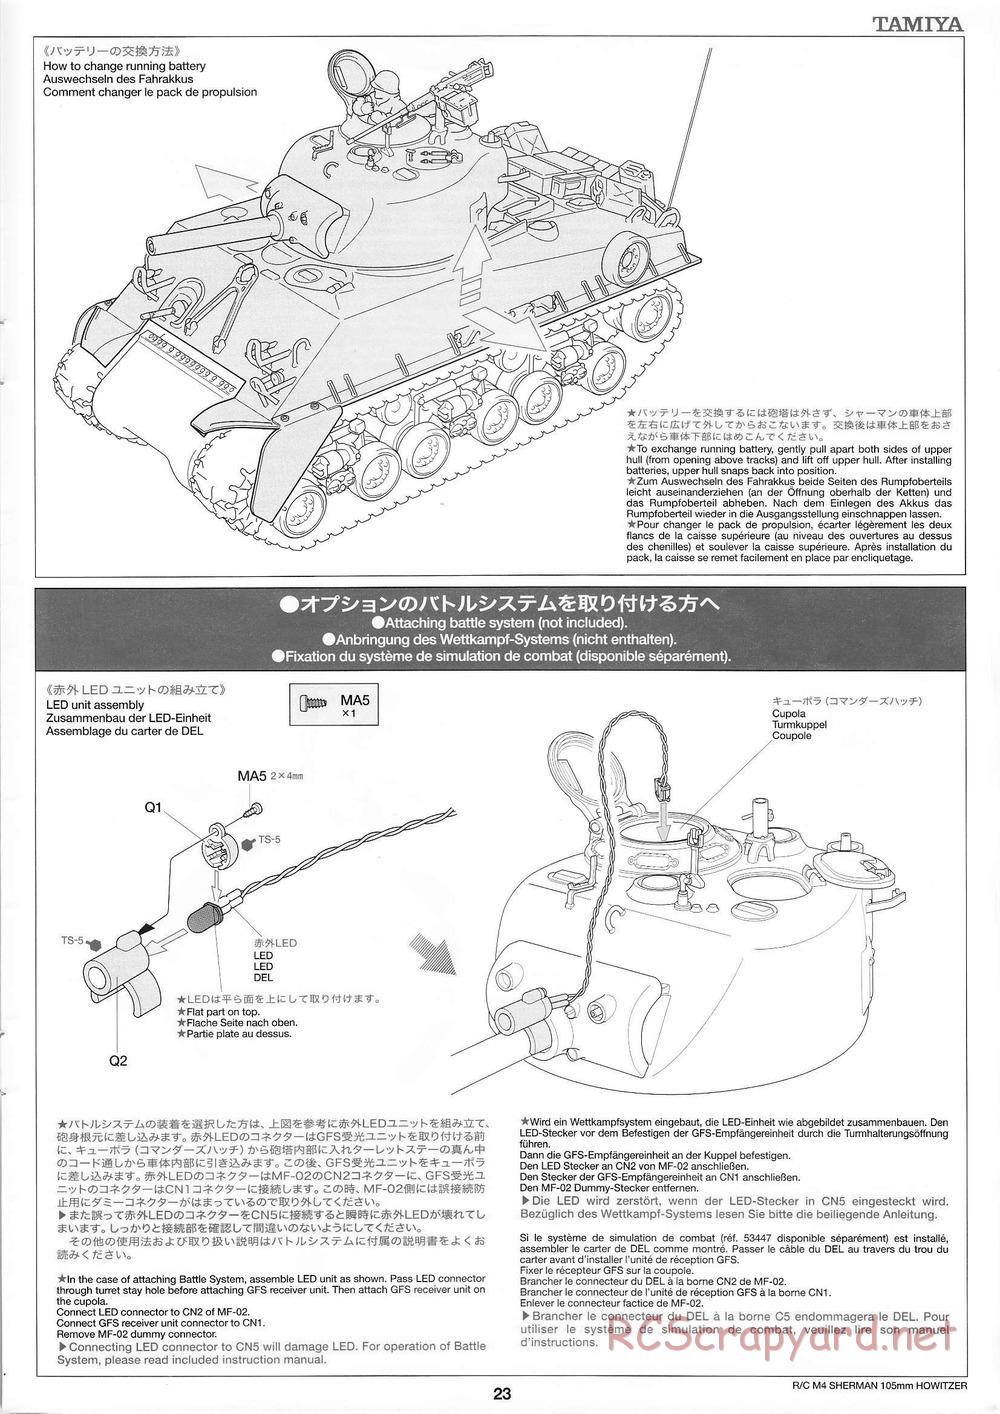 Tamiya - M4 Sherman 105mm Howitzer - 1/16 Scale Chassis - Manual - Page 23